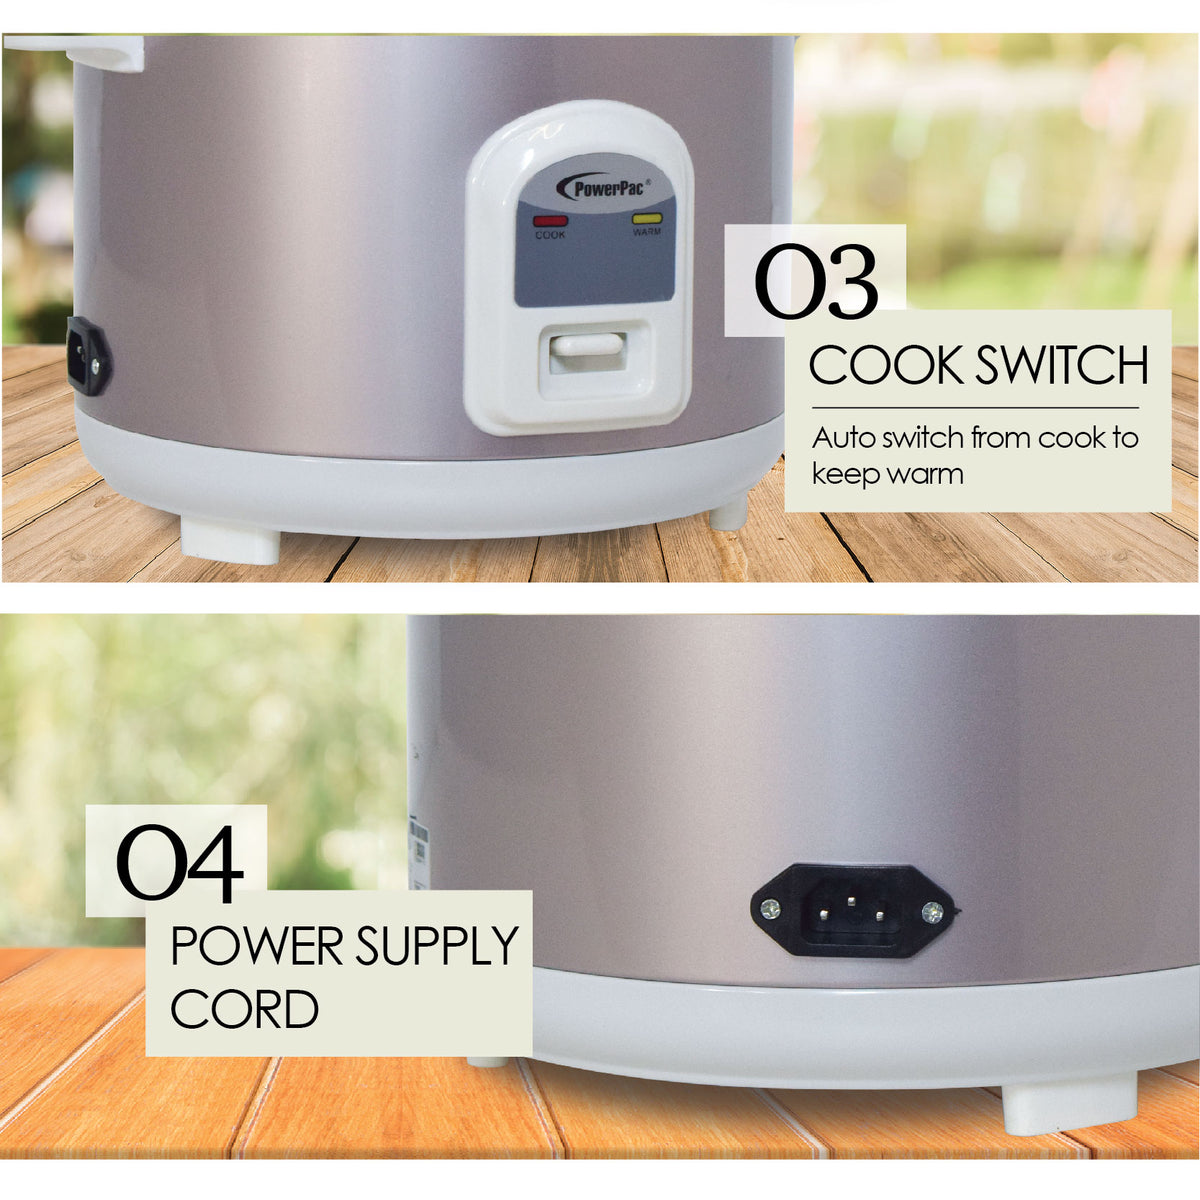 0.6L Rice Cooker with Steamer (PPRC62) - PowerPacSG